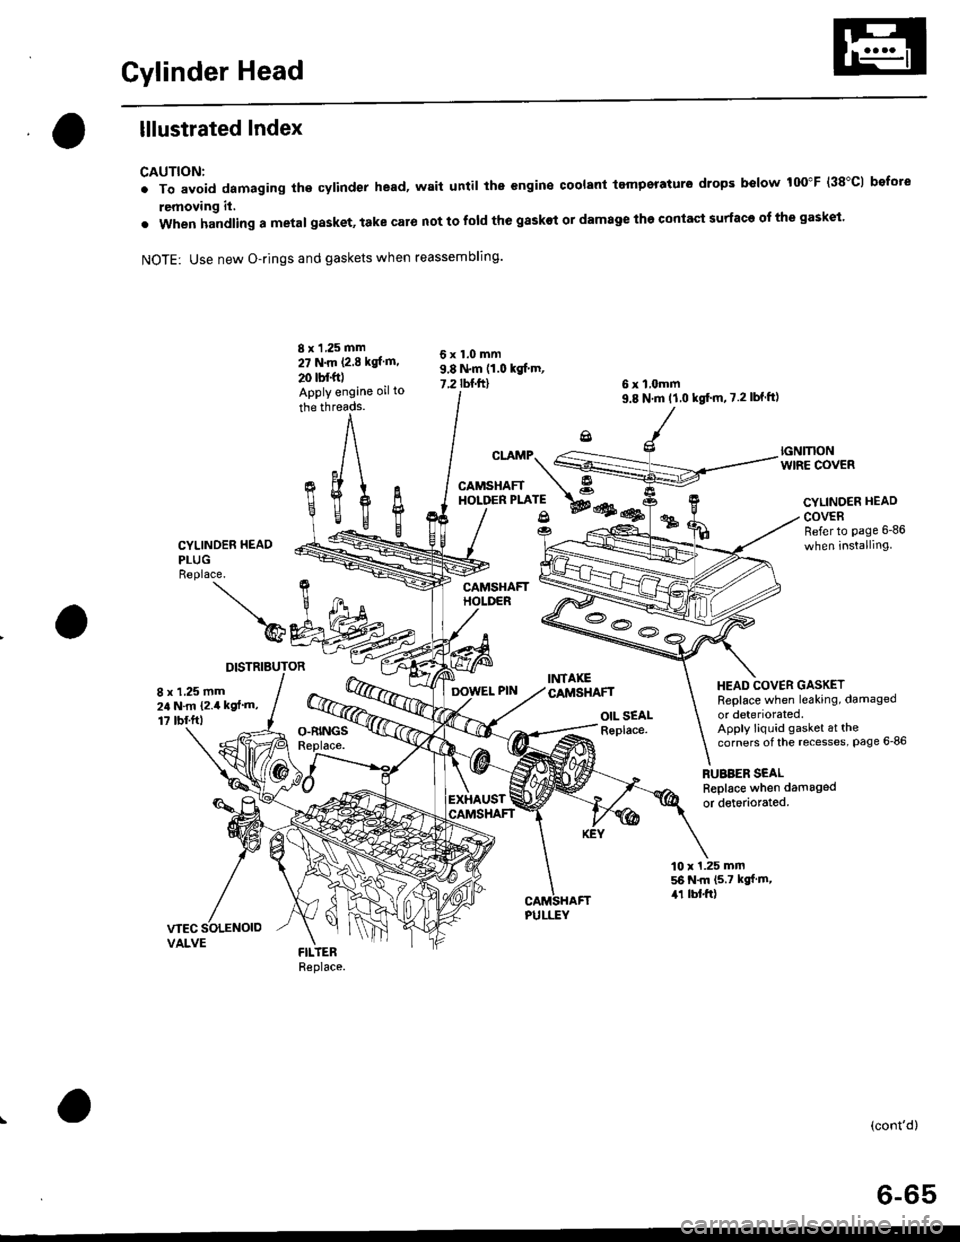 HONDA CIVIC 1997 6.G Workshop Manual Cylinder Head
lllustrated Index
CAUTION:
. To avoid damaging the cylinder head, wait until the engine coolant tempsraturo drops below 100"F (38"C1 bofote
removing it,
. when handling a metal gasket, t